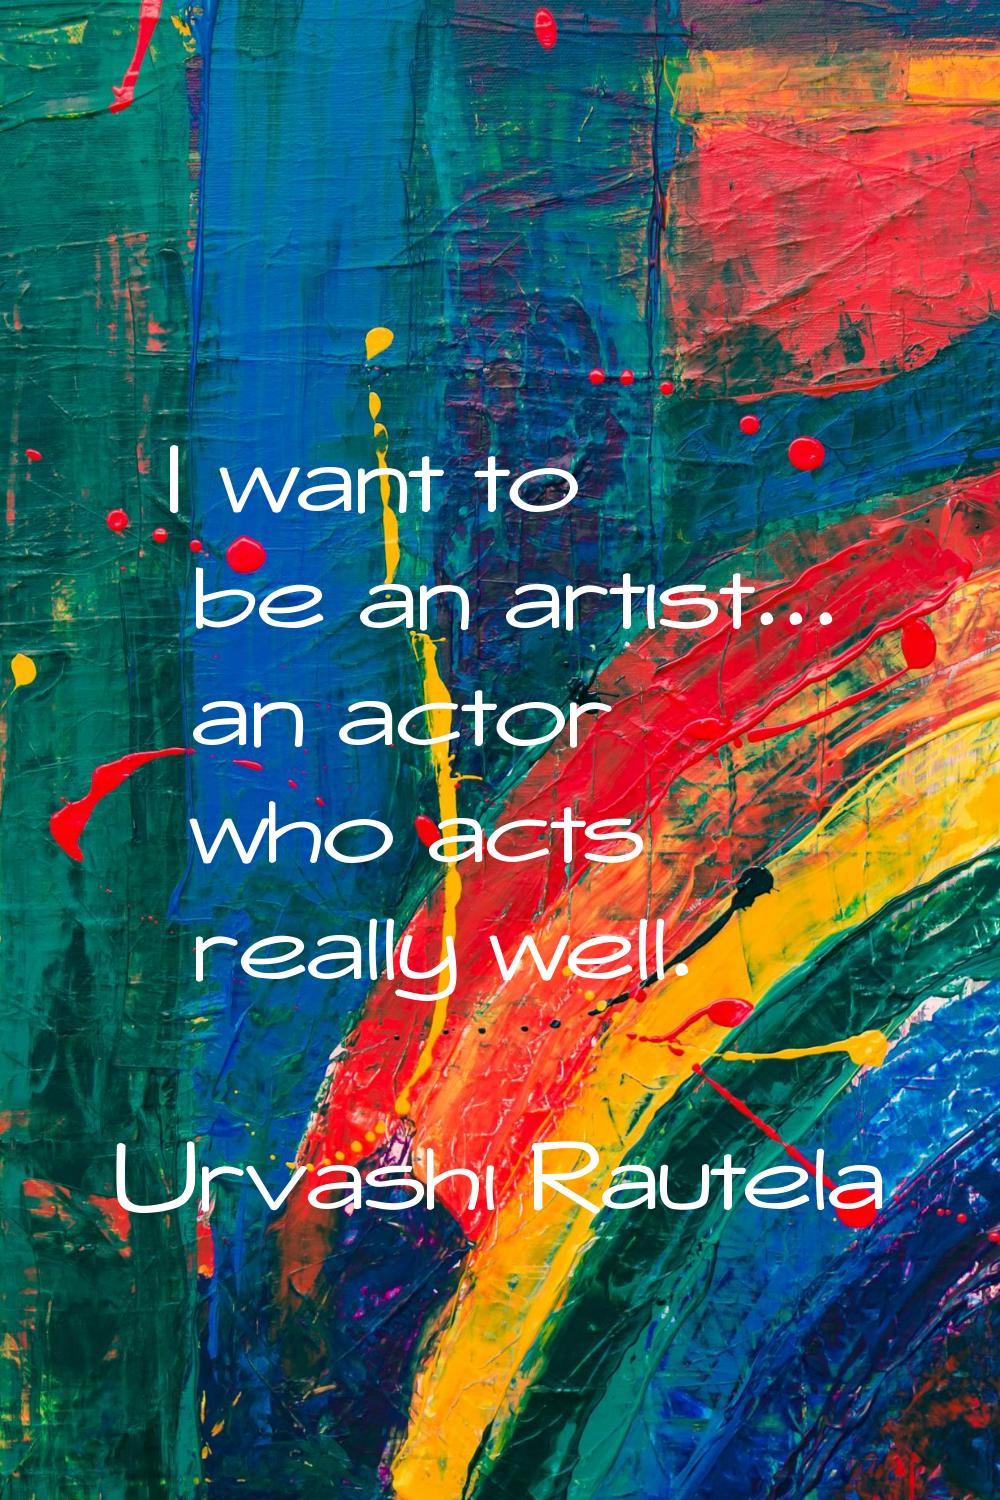 I want to be an artist... an actor who acts really well.